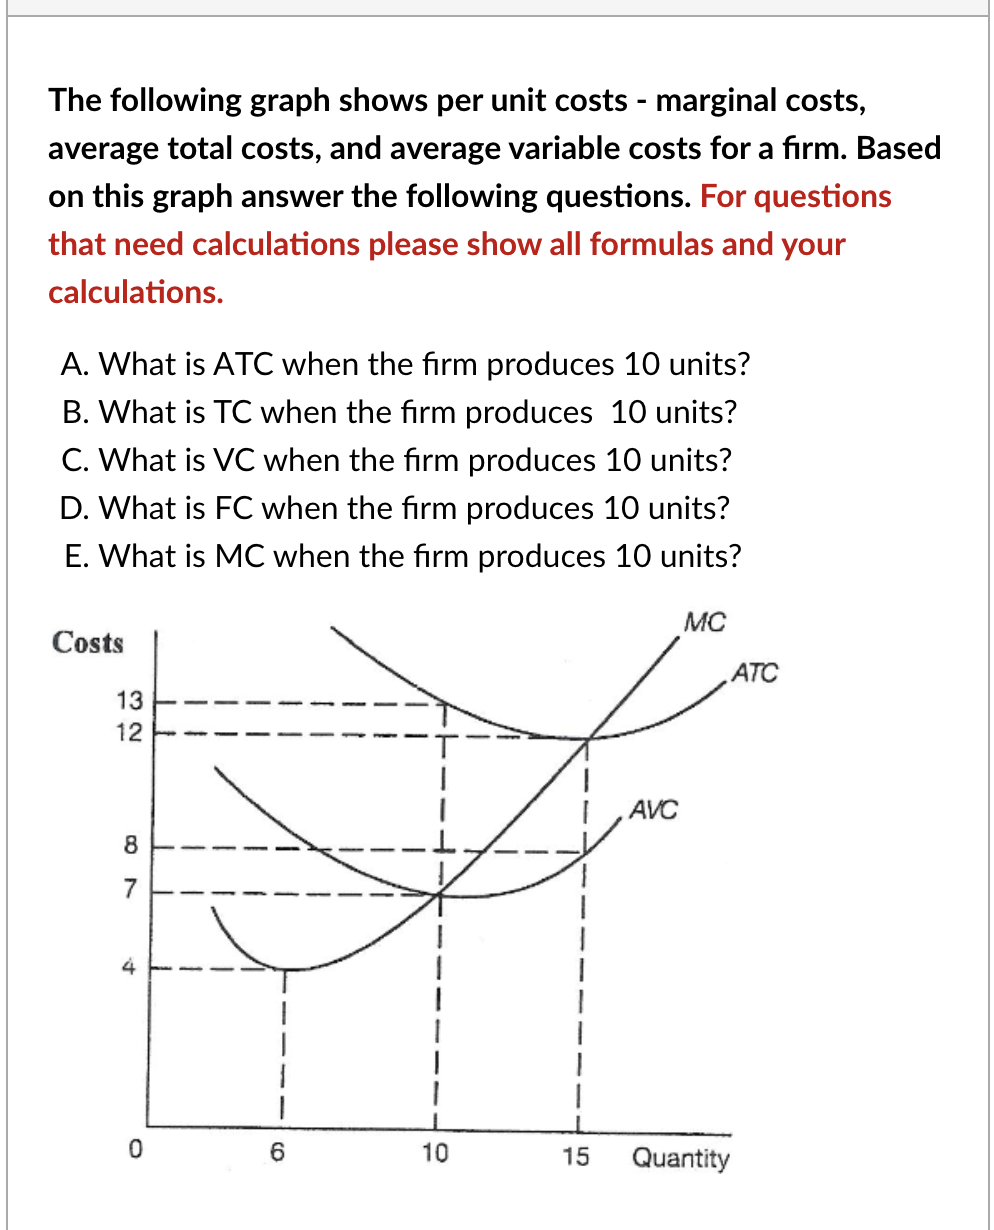 The following graph shows per unit costs - marginal costs,
average total costs, and average variable costs for a firm. Based
on this graph answer the following questions. For questions
that need calculations please show all formulas and your
calculations.
A. What is ATC when the firm produces 10 units?
B. What is TC when the firm produces 10 units?
C. What is VC when the firm produces 10 units?
D. What is FC when the firm produces 10 units?
E. What is MC when the firm produces 10 units?
Costs
13
12
8
N
t
0
6
1
10
AVC
MC
15 Quantity
ATC